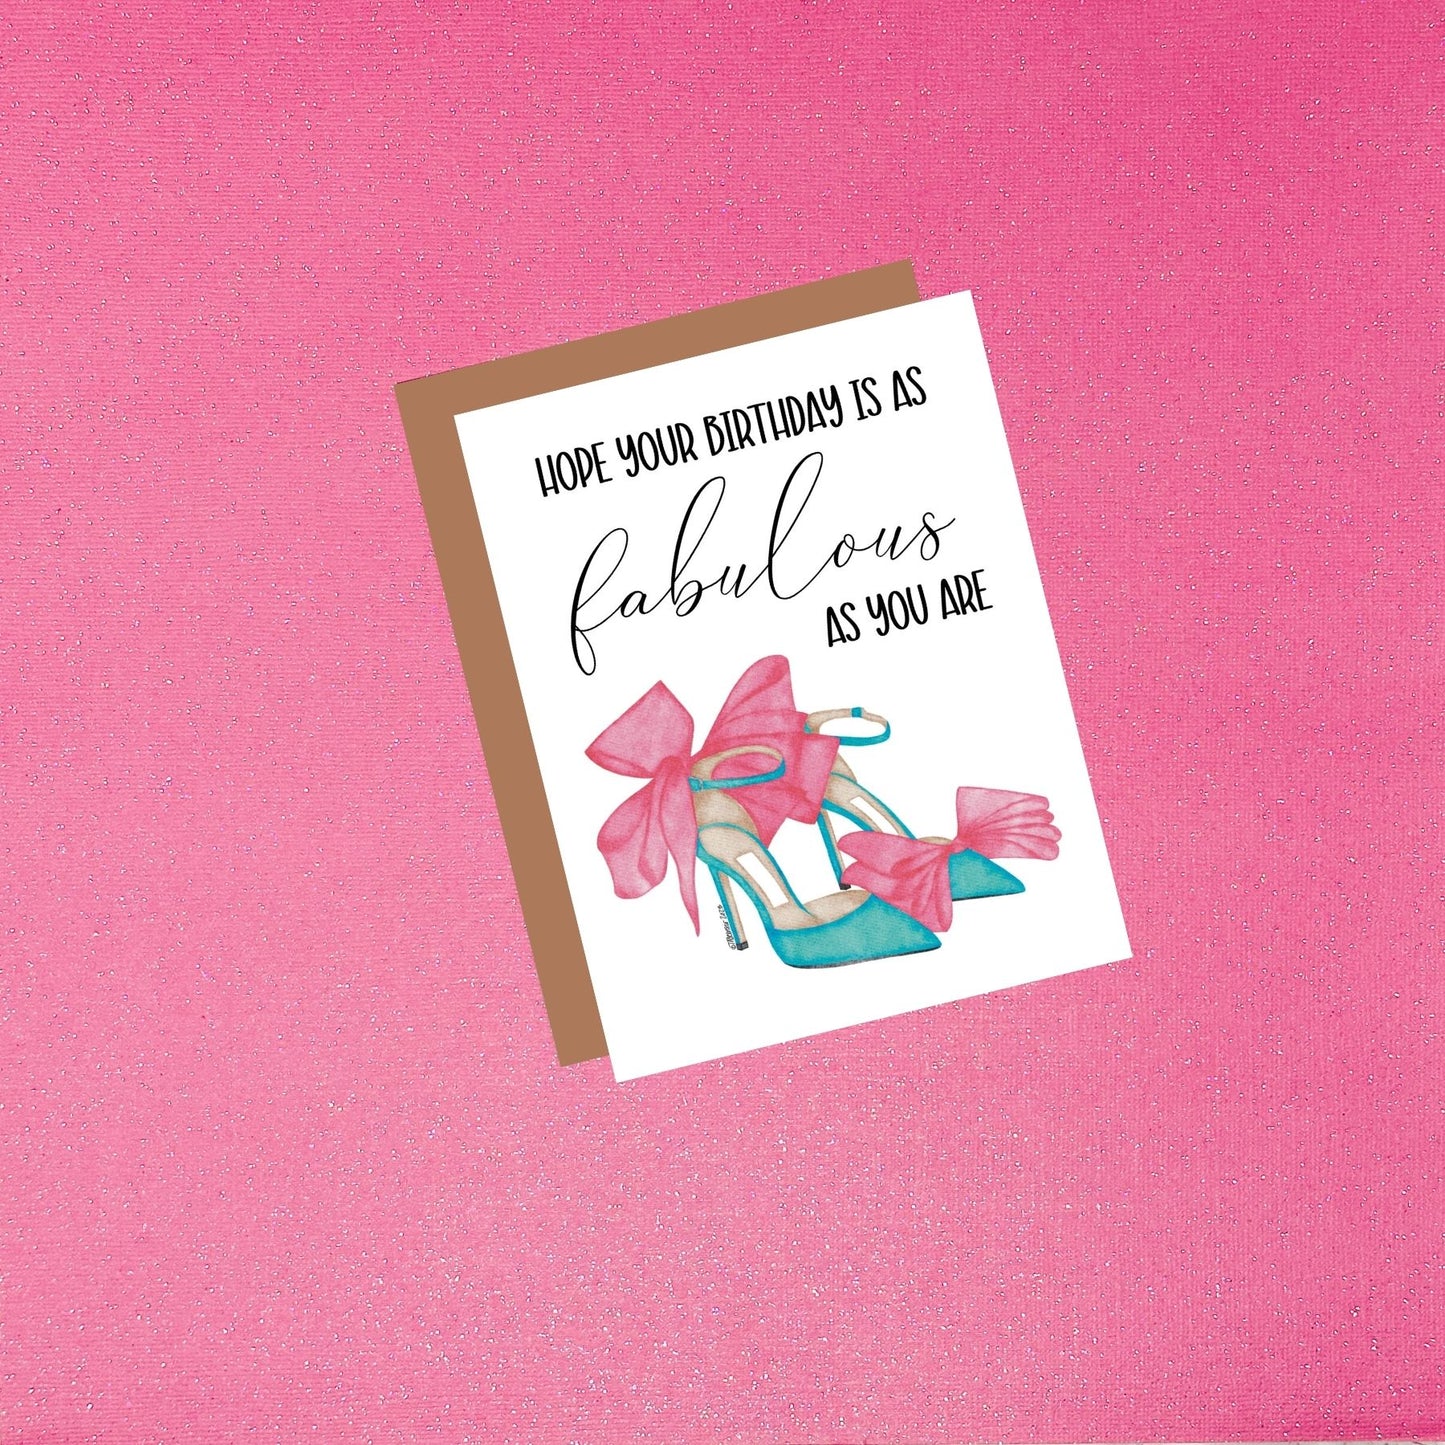 Happy Birthday - Hope Your Birthday Is As Fabulous As You Are | Watercolor Shoes Greeting Card For Her